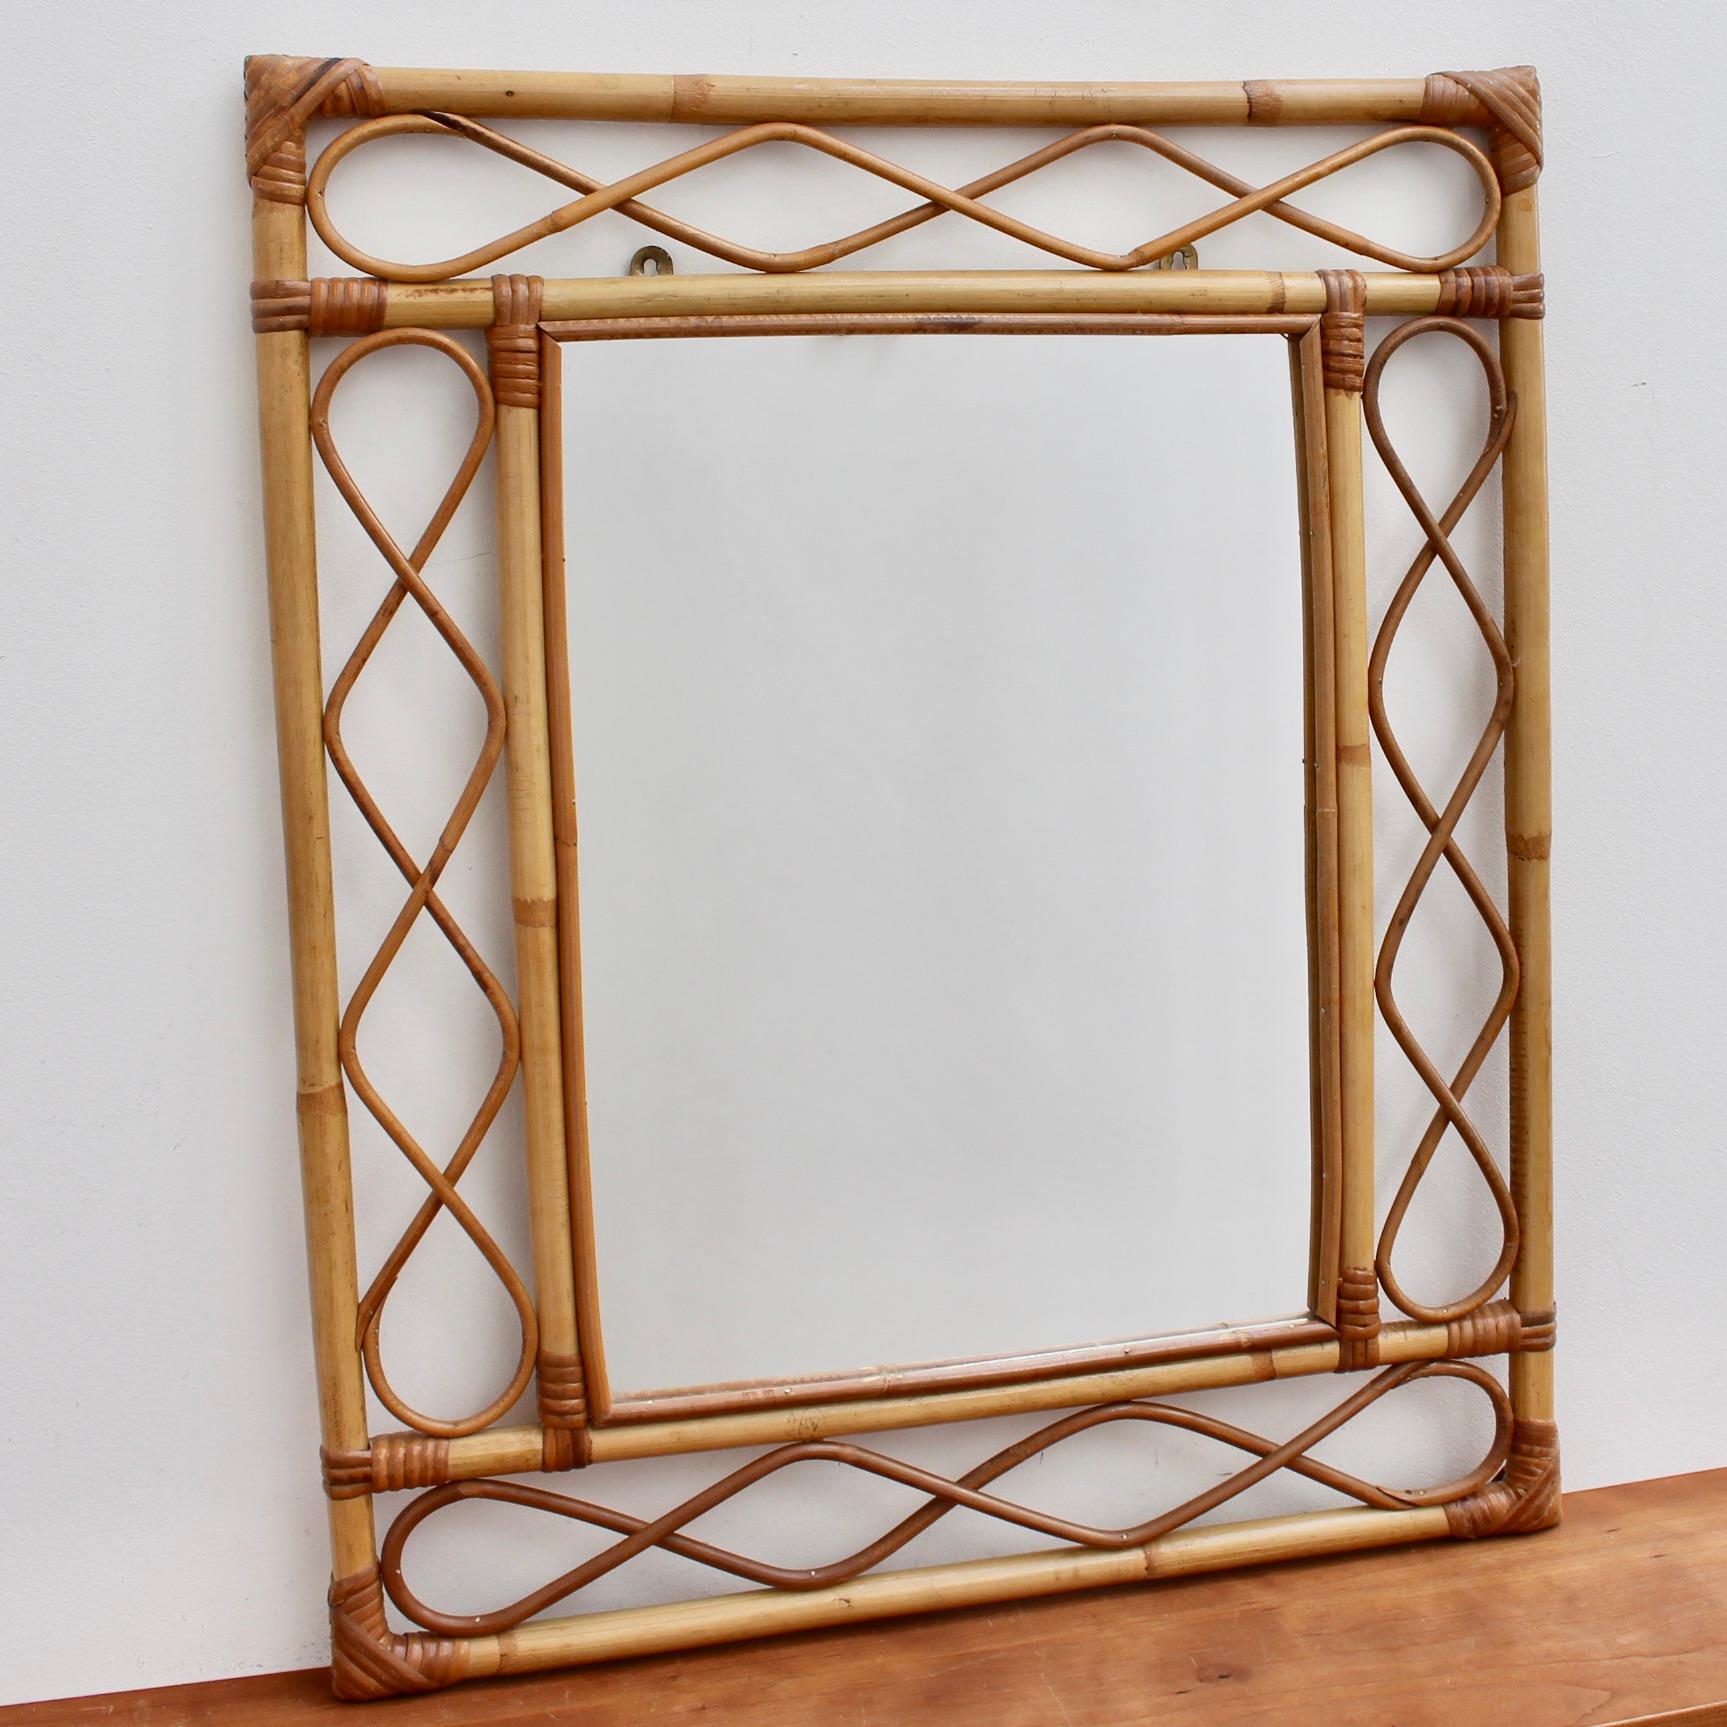 Rectangular French rattan wall mirror (circa 1960s). This is an Asian-inspired design with inner and outer frames connected by figure-eight shapes of rattan cane. The corners are lashed together and protected with rattan strands. Incredibly stylish,